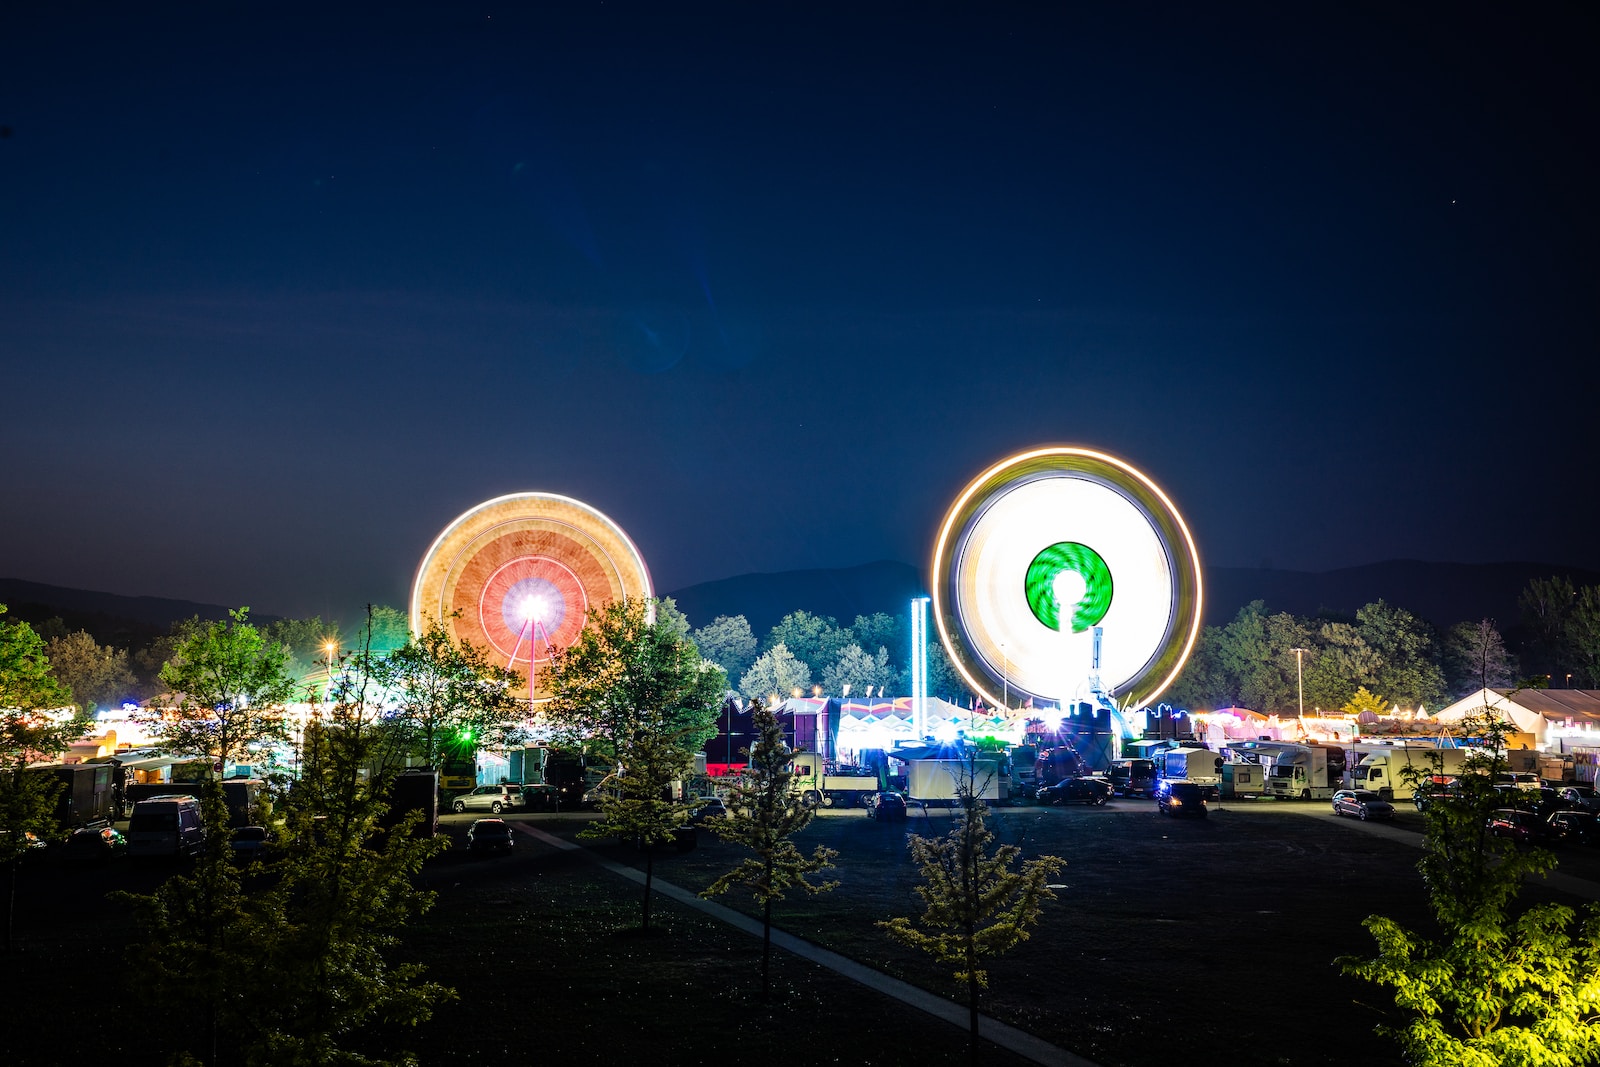 a fairground at night with a ferris wheel in the foreground